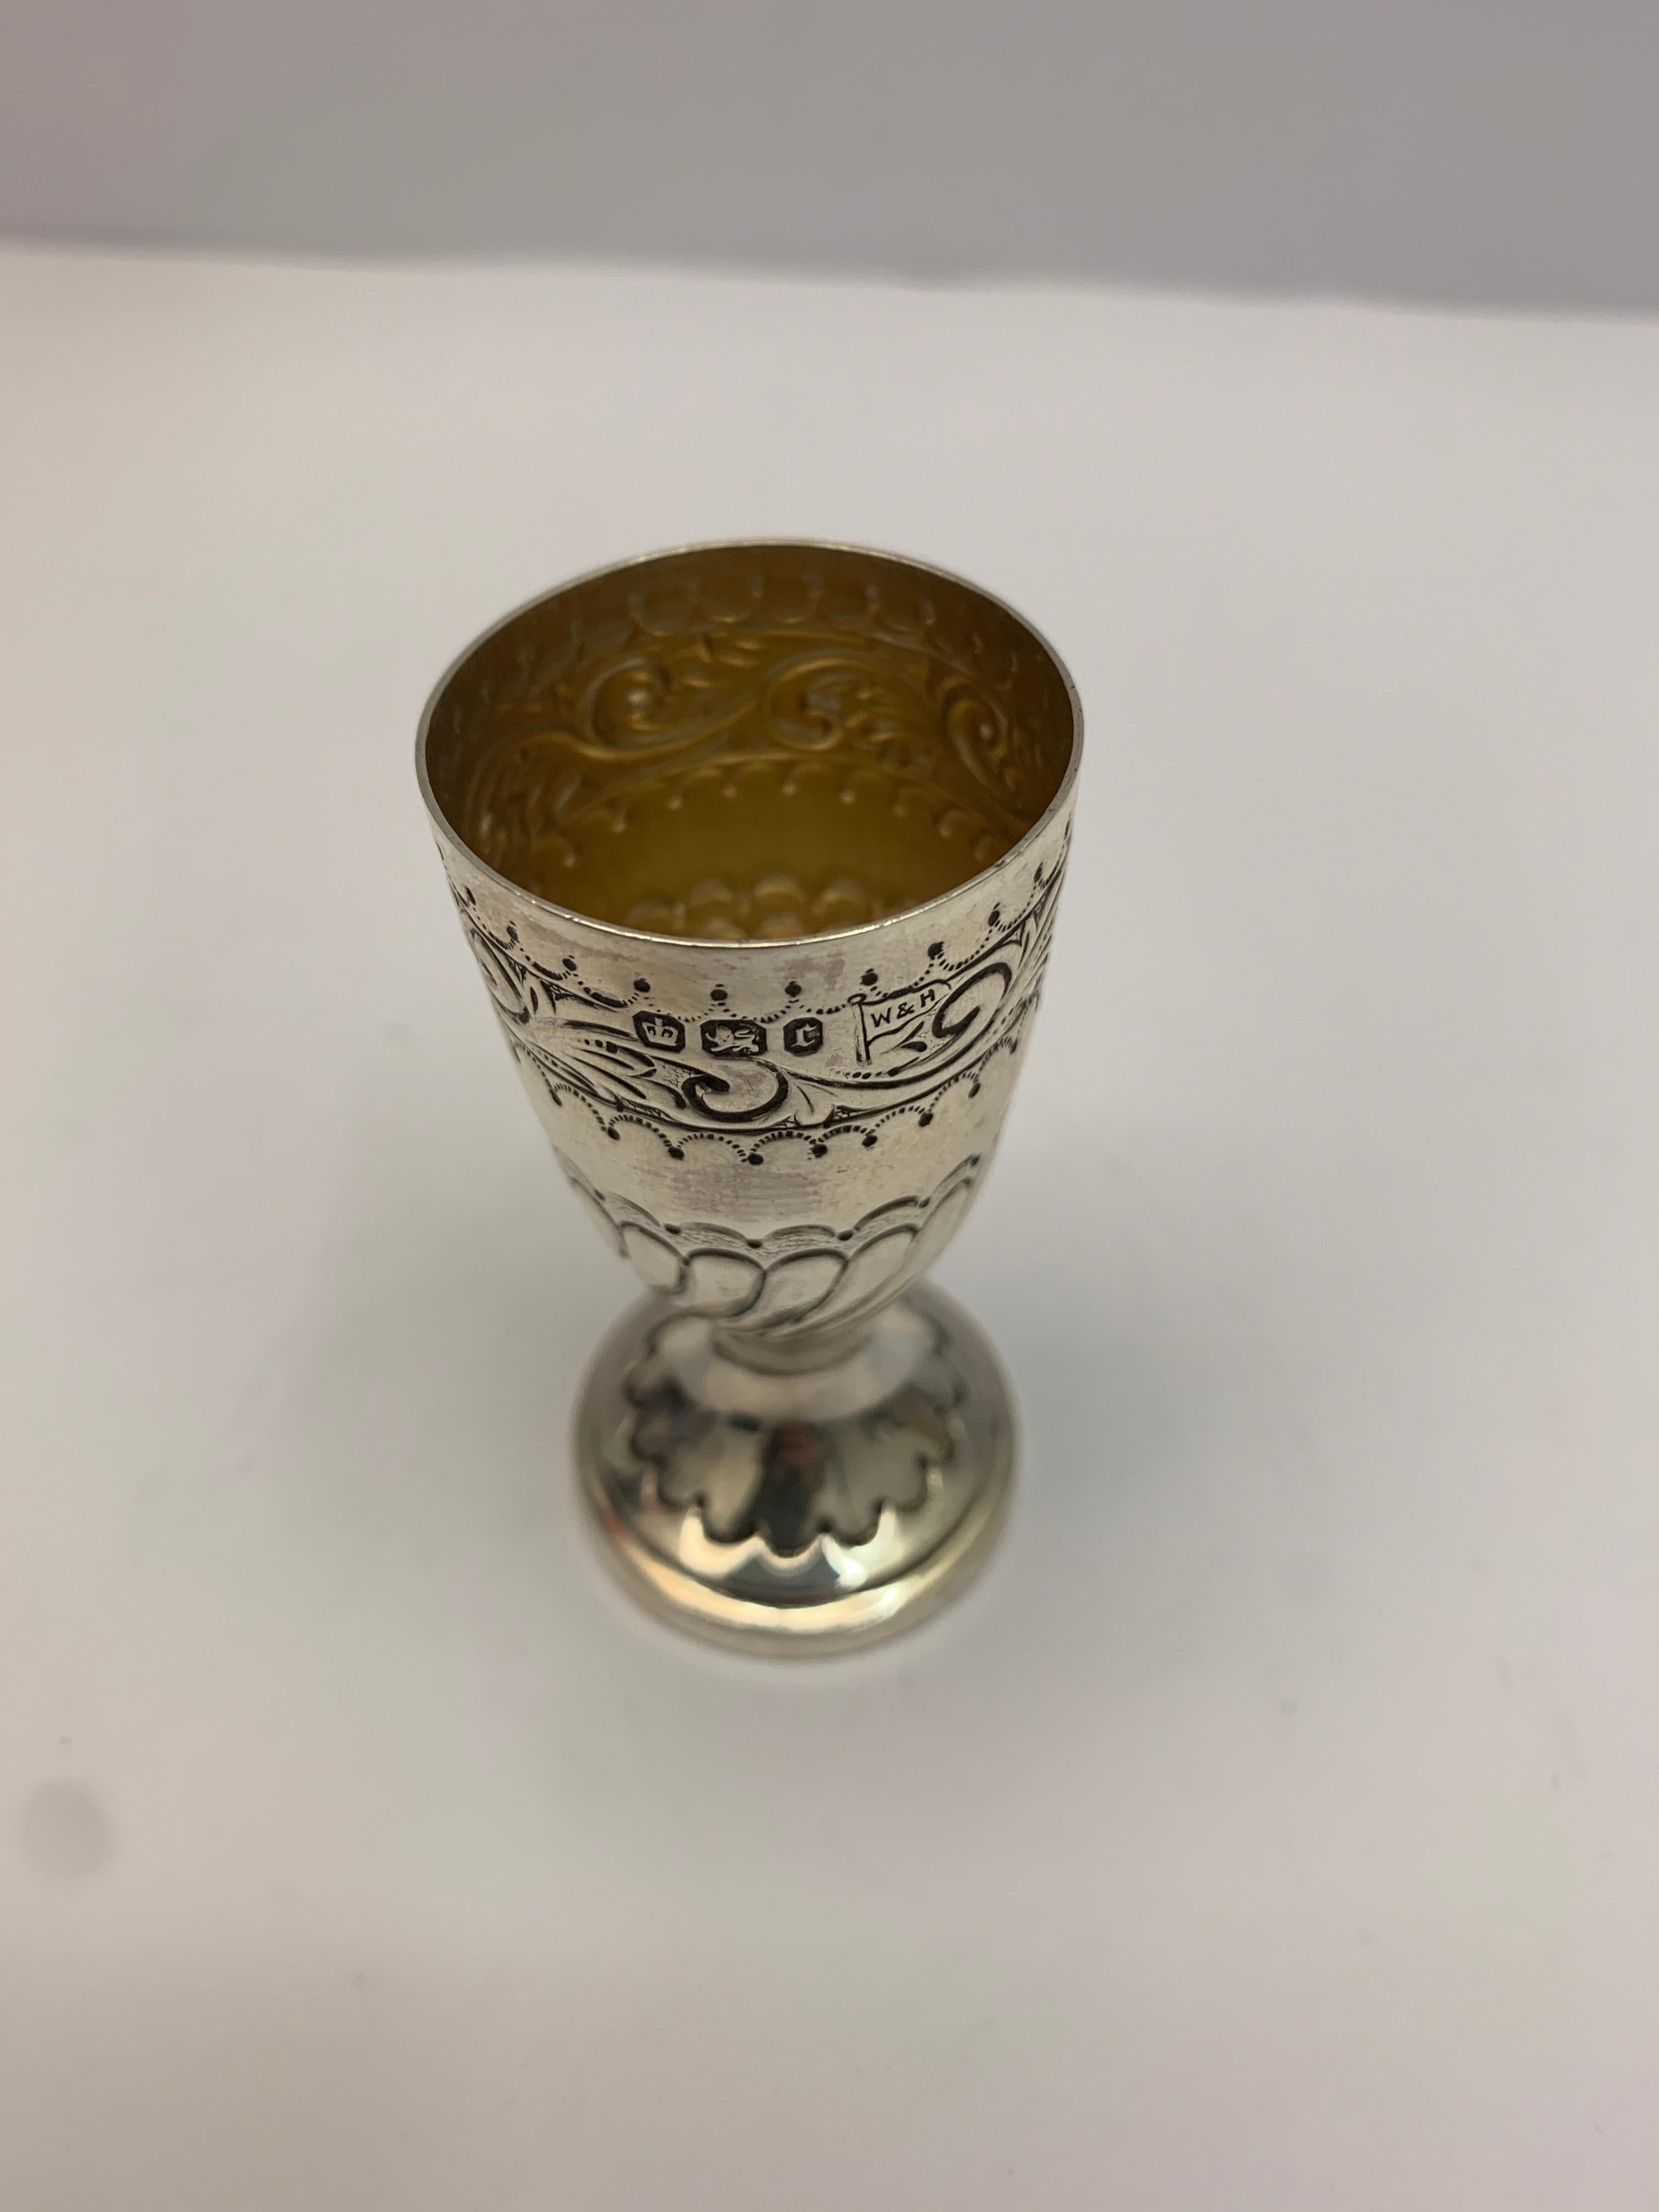 A mini silver chalice made in 1895. Delicately decorated with a gilt interior.